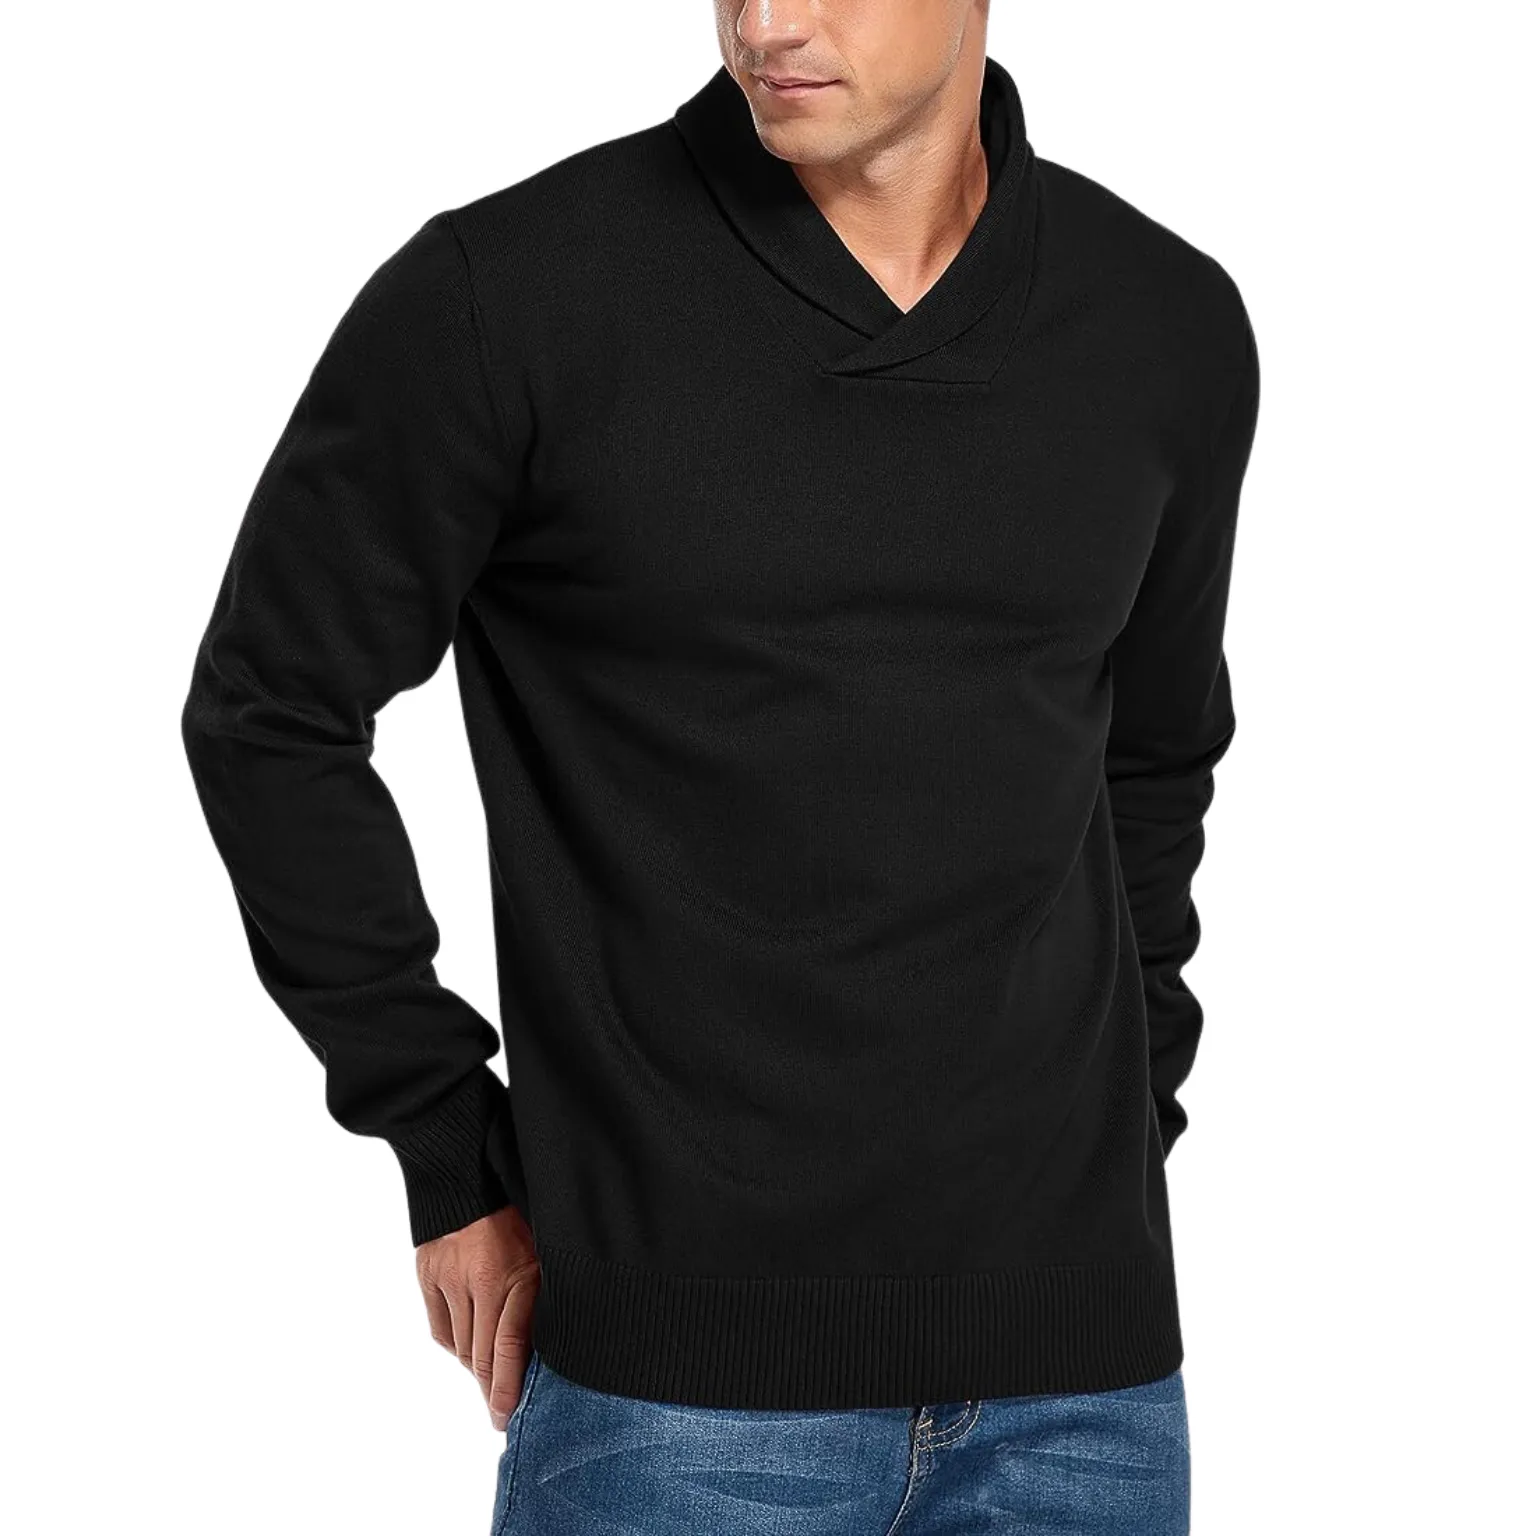 Shawl Collar Sweater manufacturing with trendy design